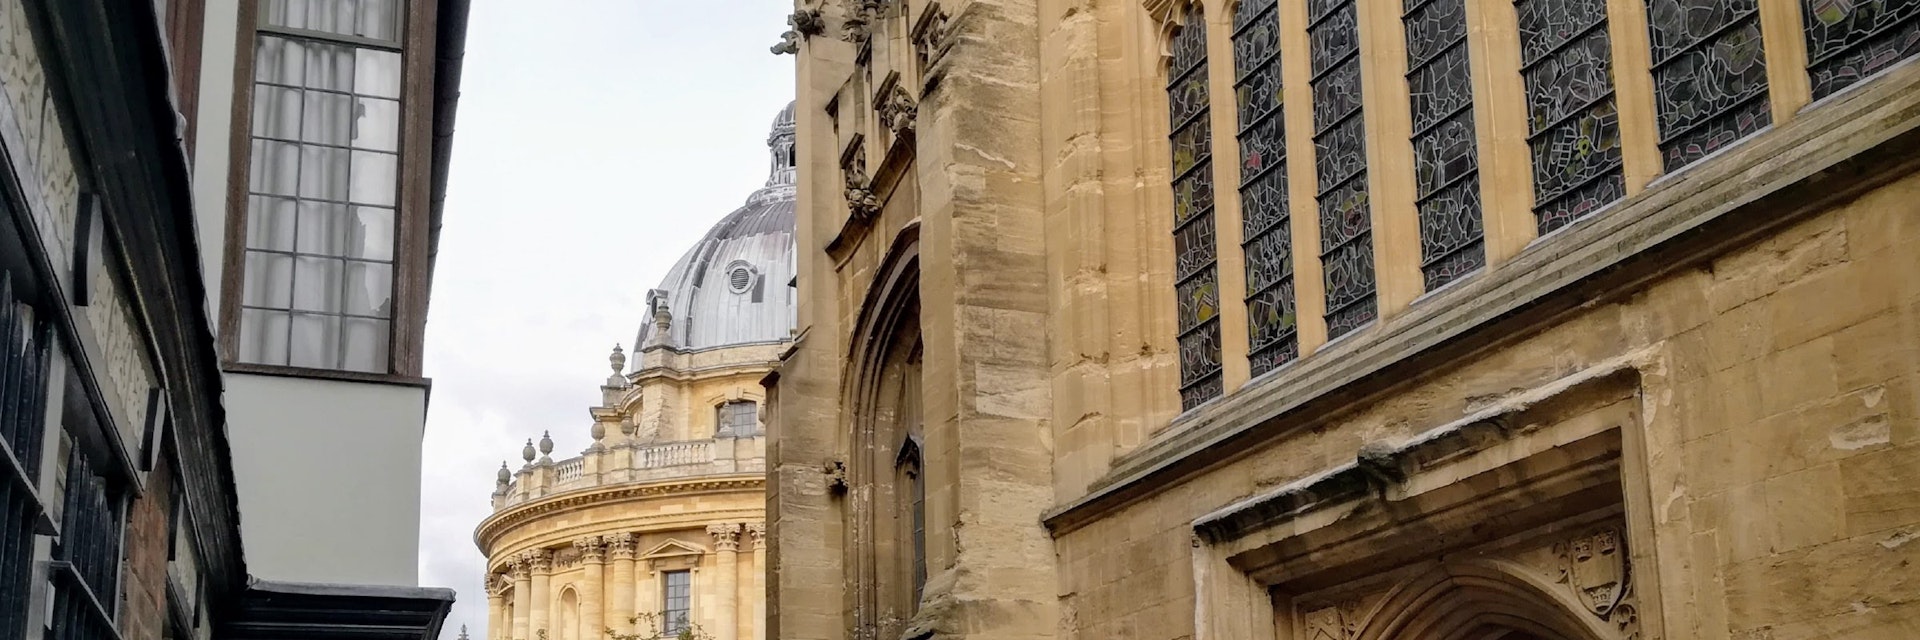 A side view of door in St Mary's Passage with the Radcliffe Camera in background.